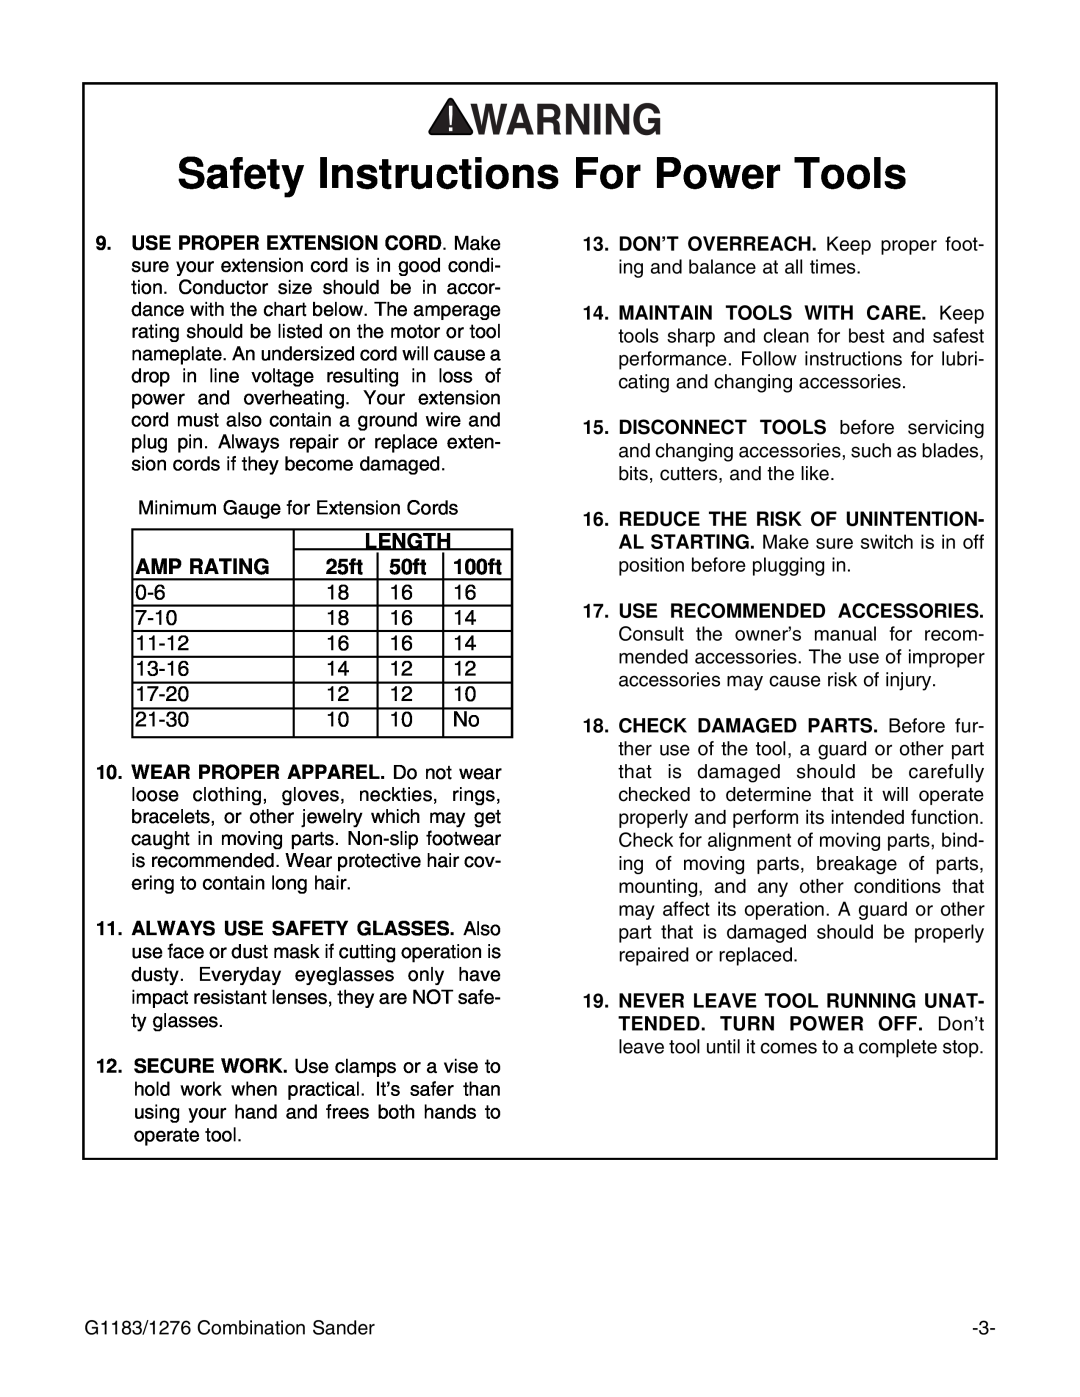 Grizzly G1276, G1183 instruction manual Length, Amp Rating, 25ft, 50ft, 100ft, Safety Instructions For Power Tools 